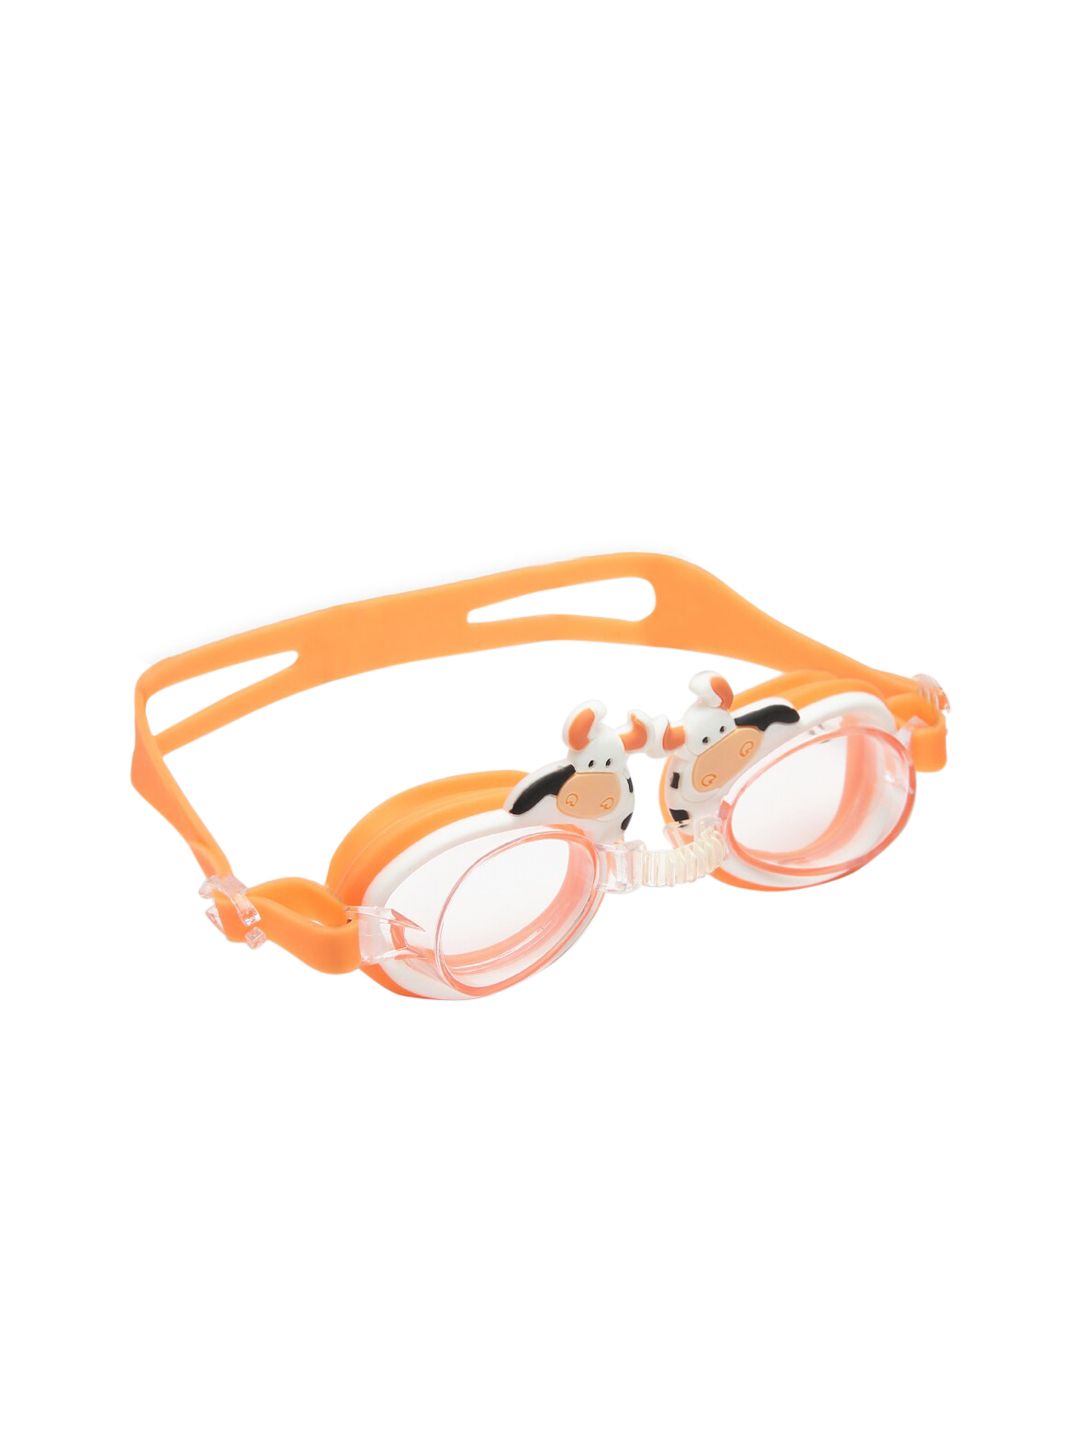 CUKOO Women Orange Solid Comfort-Fit Swimming Goggles Price in India